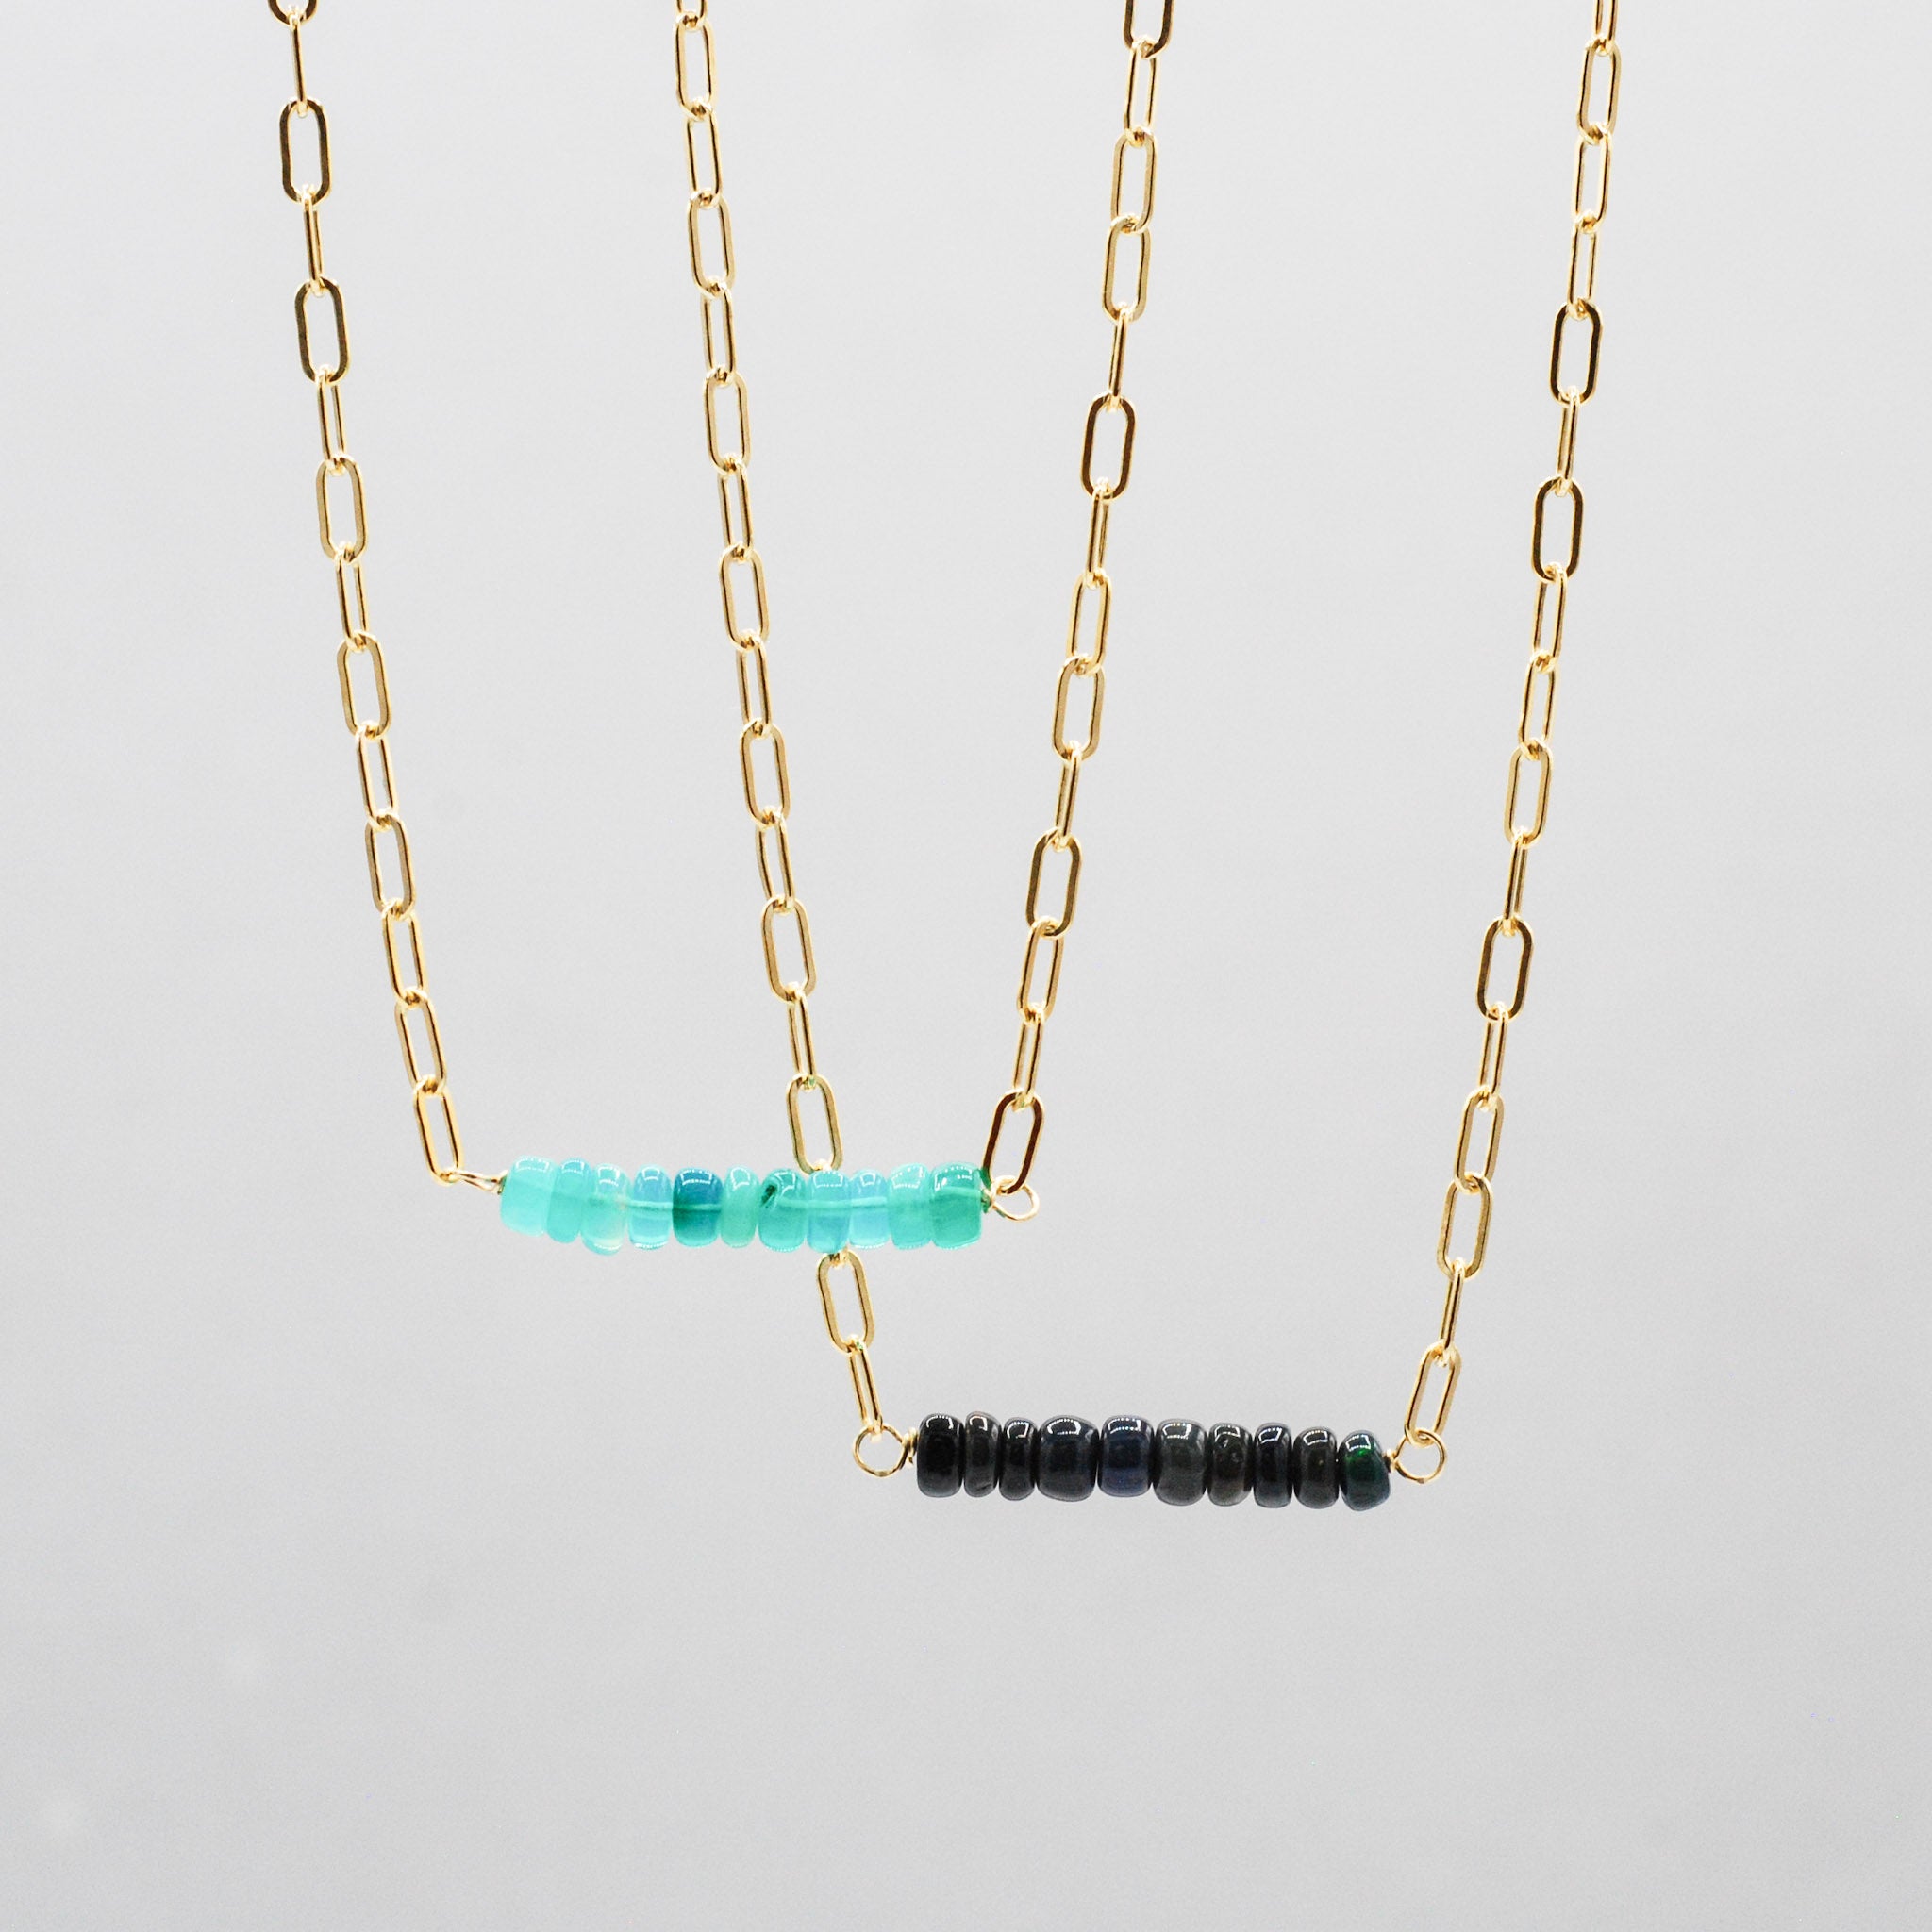 Tropical Teal or Midnight Navy Ethiopian Opal Necklace - Jewel Ya